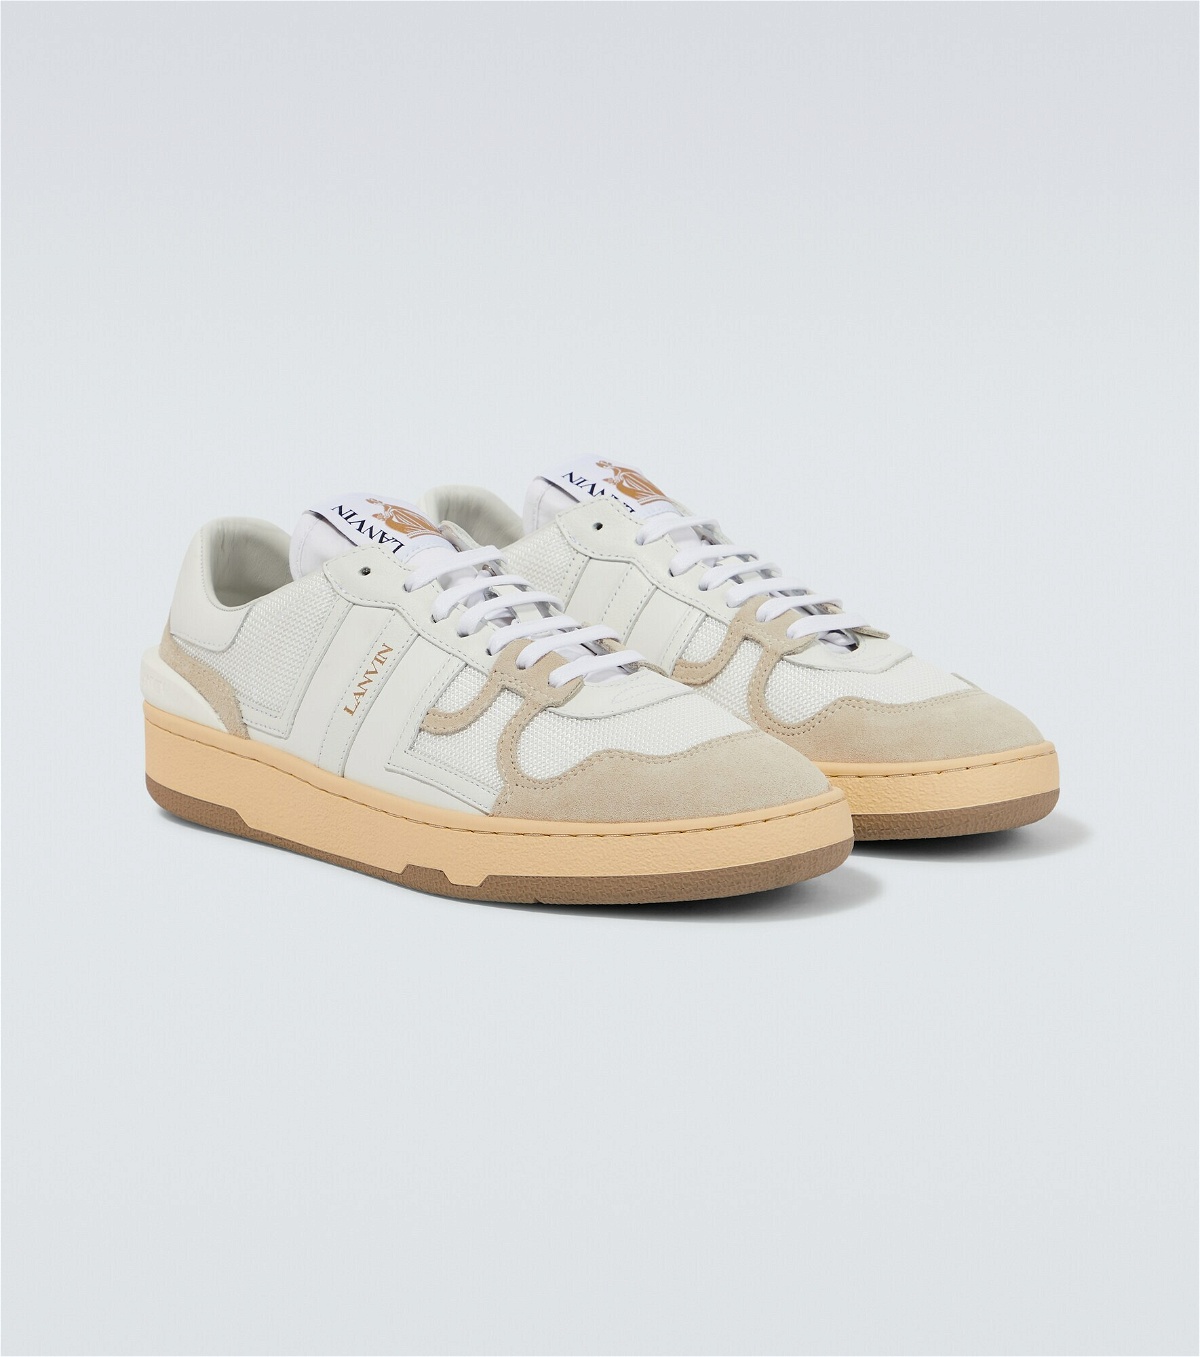 Lanvin - Clay leather low-top sneakers Lanvin